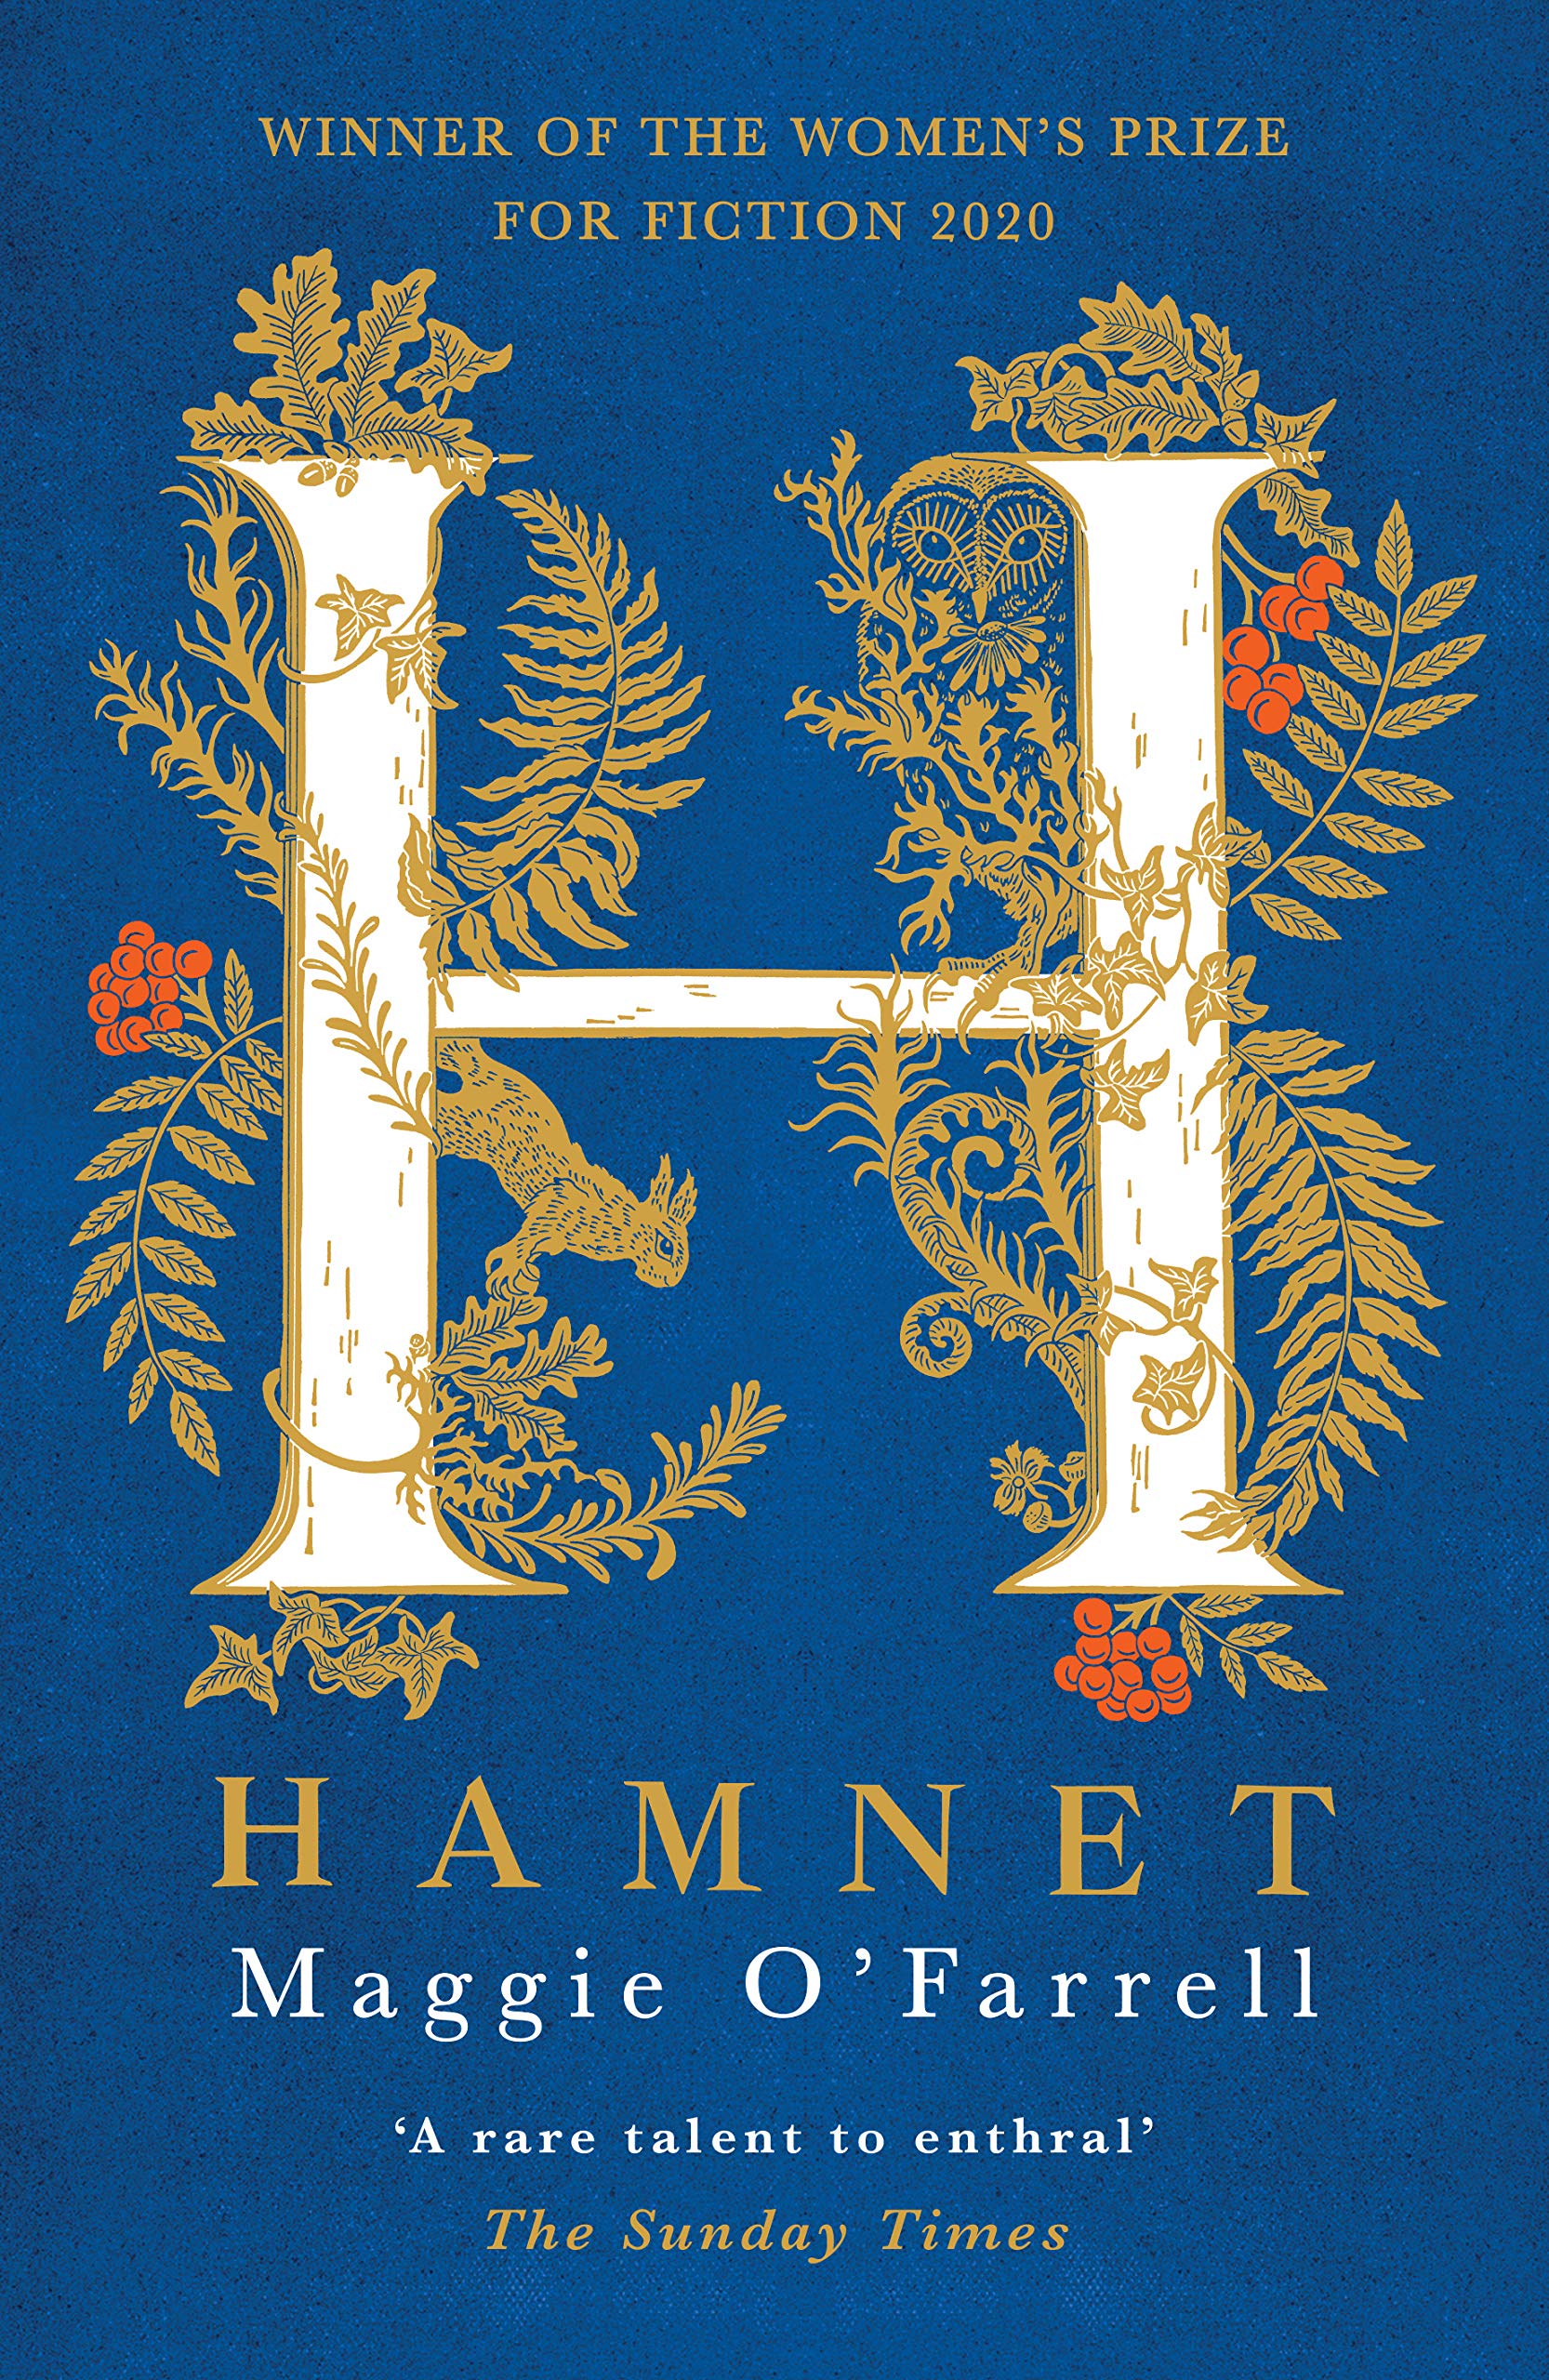 Book cover of Hamnet, by Maggie O'Farrell